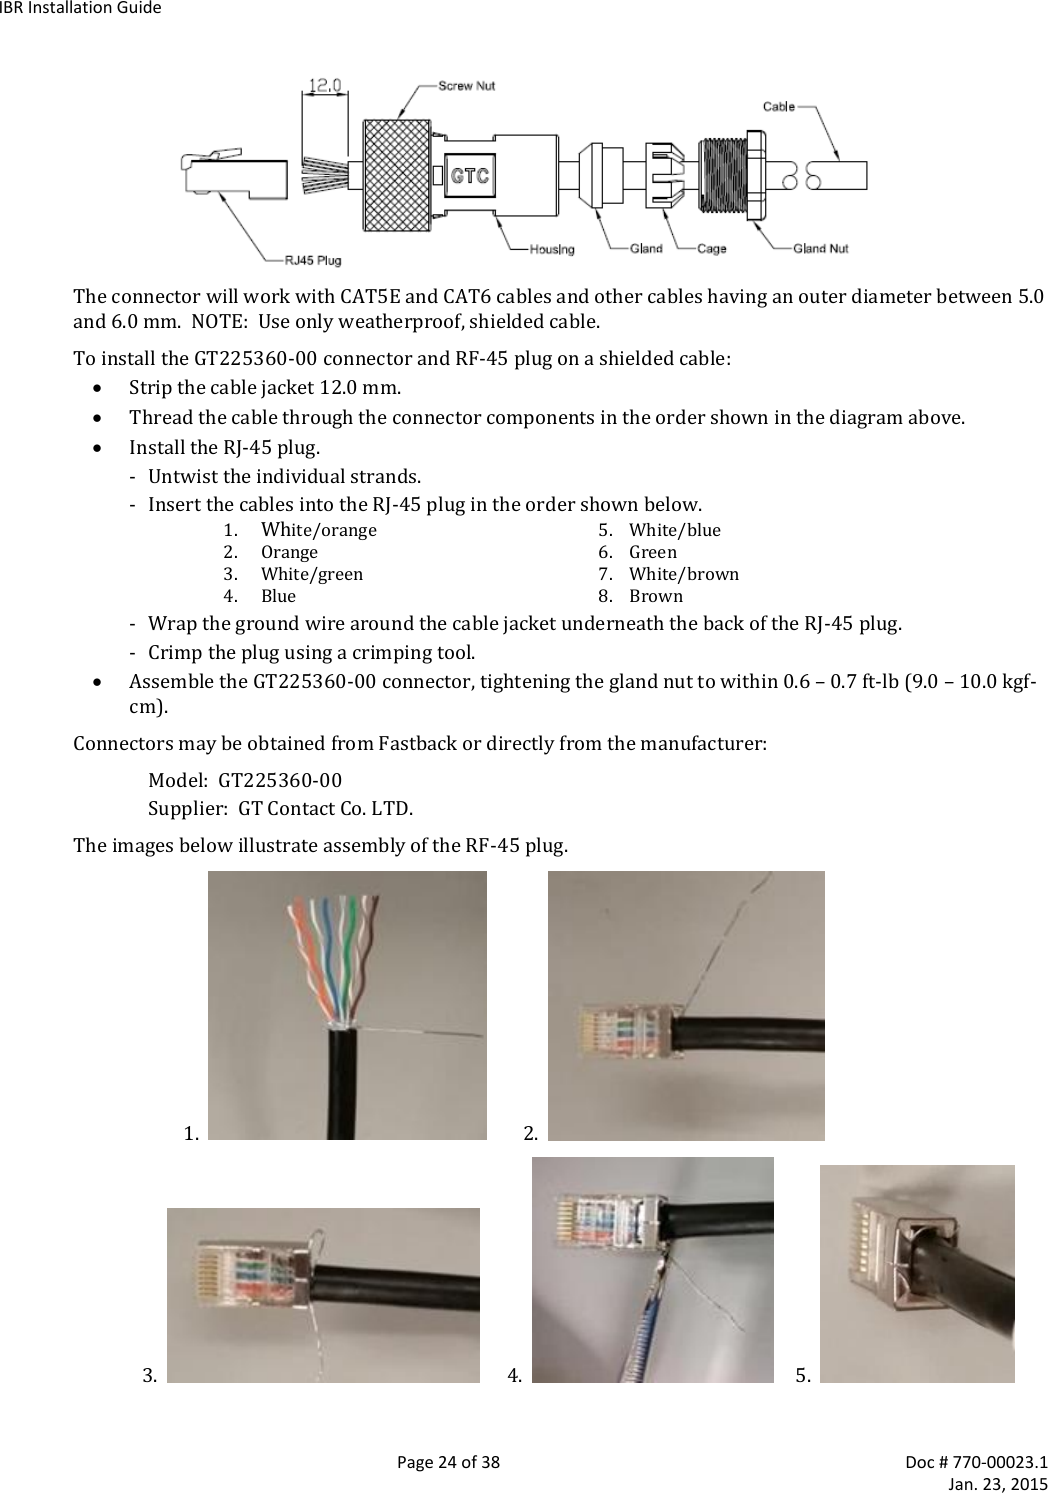 IBR Installation Guide   Page 24 of 38  Doc # 770-00023.1     Jan. 23, 2015  The connector will work with CAT5E and CAT6 cables and other cables having an outer diameter between 5.0 and 6.0 mm.  NOTE:  Use only weatherproof, shielded cable. To install the GT225360-00 connector and RF-45 plug on a shielded cable:  Strip the cable jacket 12.0 mm.  Thread the cable through the connector components in the order shown in the diagram above.  Install the RJ-45 plug. - Untwist the individual strands. - Insert the cables into the RJ-45 plug in the order shown below. 1. White/orange  5.    White/blue 2. Orange  6.    Green 3. White/green  7.    White/brown 4. Blue  8.    Brown - Wrap the ground wire around the cable jacket underneath the back of the RJ-45 plug. - Crimp the plug using a crimping tool.  Assemble the GT225360-00 connector, tightening the gland nut to within 0.6 – 0.7 ft-lb (9.0 – 10.0 kgf-cm). Connectors may be obtained from Fastback or directly from the manufacturer: Model:  GT225360-00  Supplier:  GT Contact Co. LTD.   The images below illustrate assembly of the RF-45 plug.                         1.           2.                      3.         4.        5.    